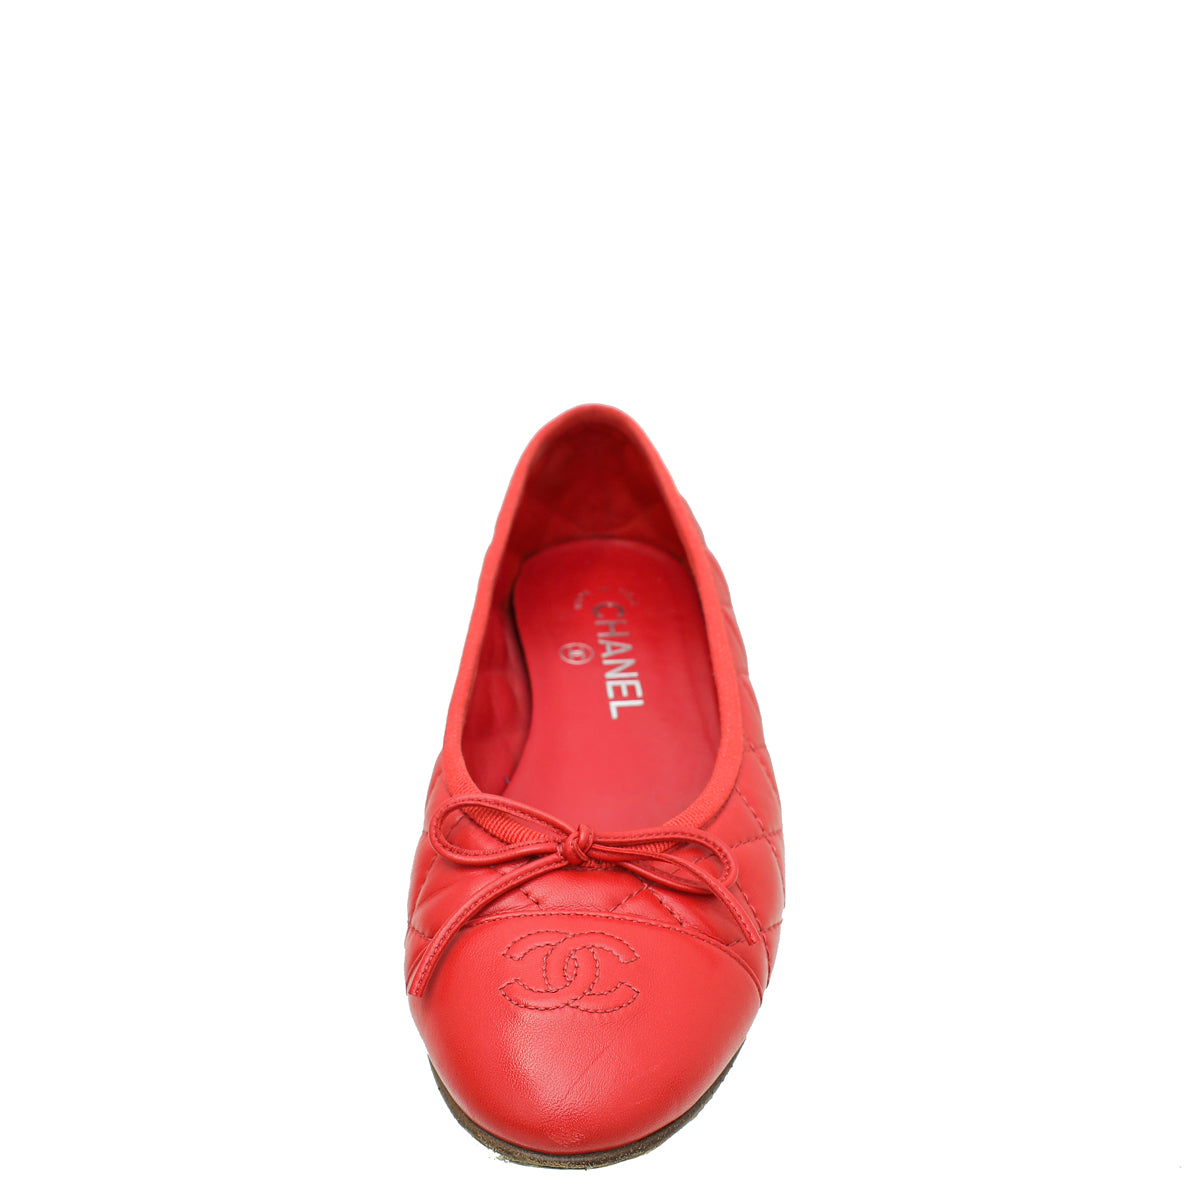 Chanel Red CC Cap Toe Quilted Flat Ballerina 38